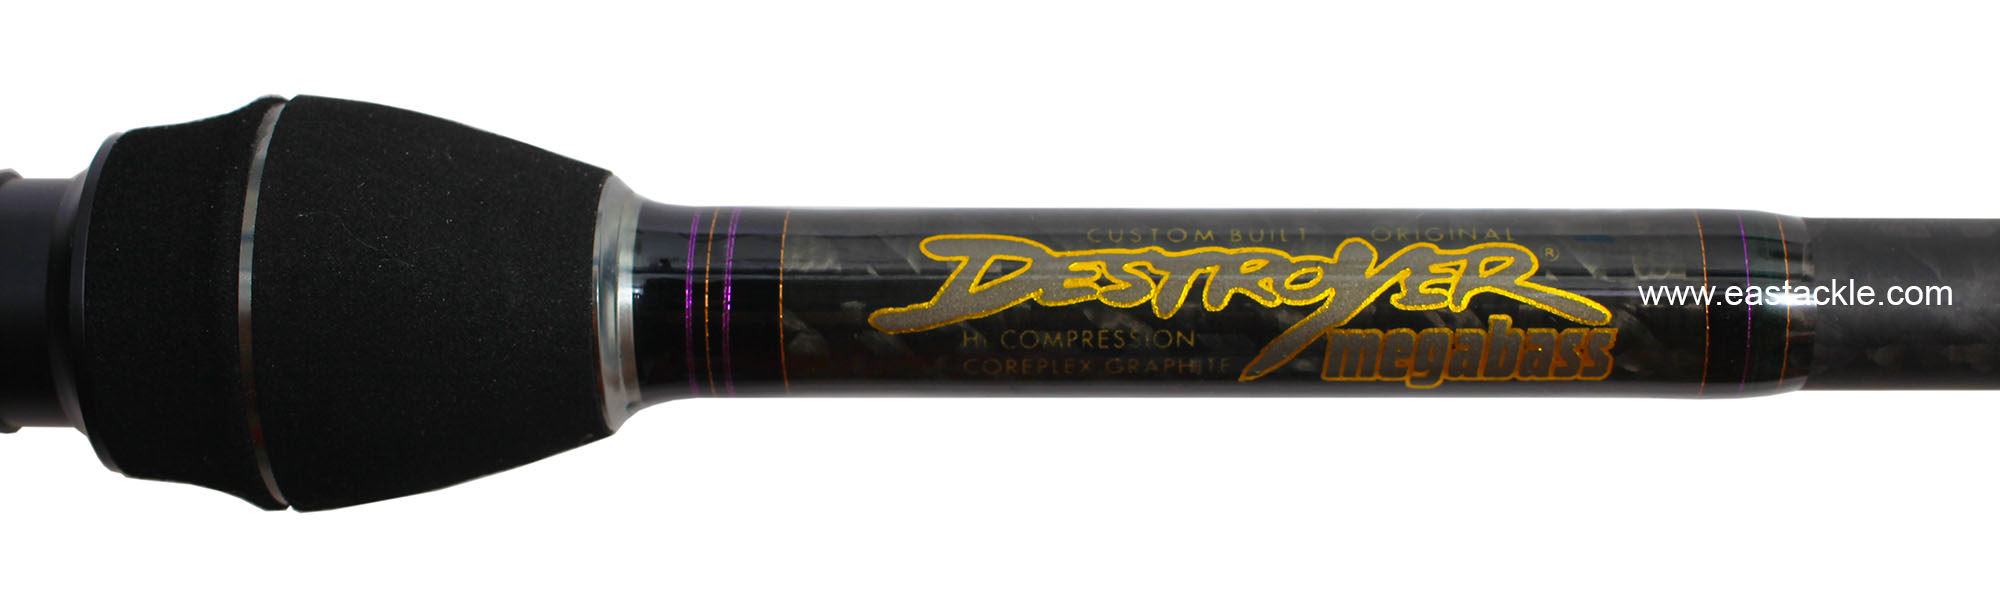 Megabass - Destroyer Phase 3 - F6-67X - G-AX - Bait Casting Rod - Logo (Top View) | Eastackle